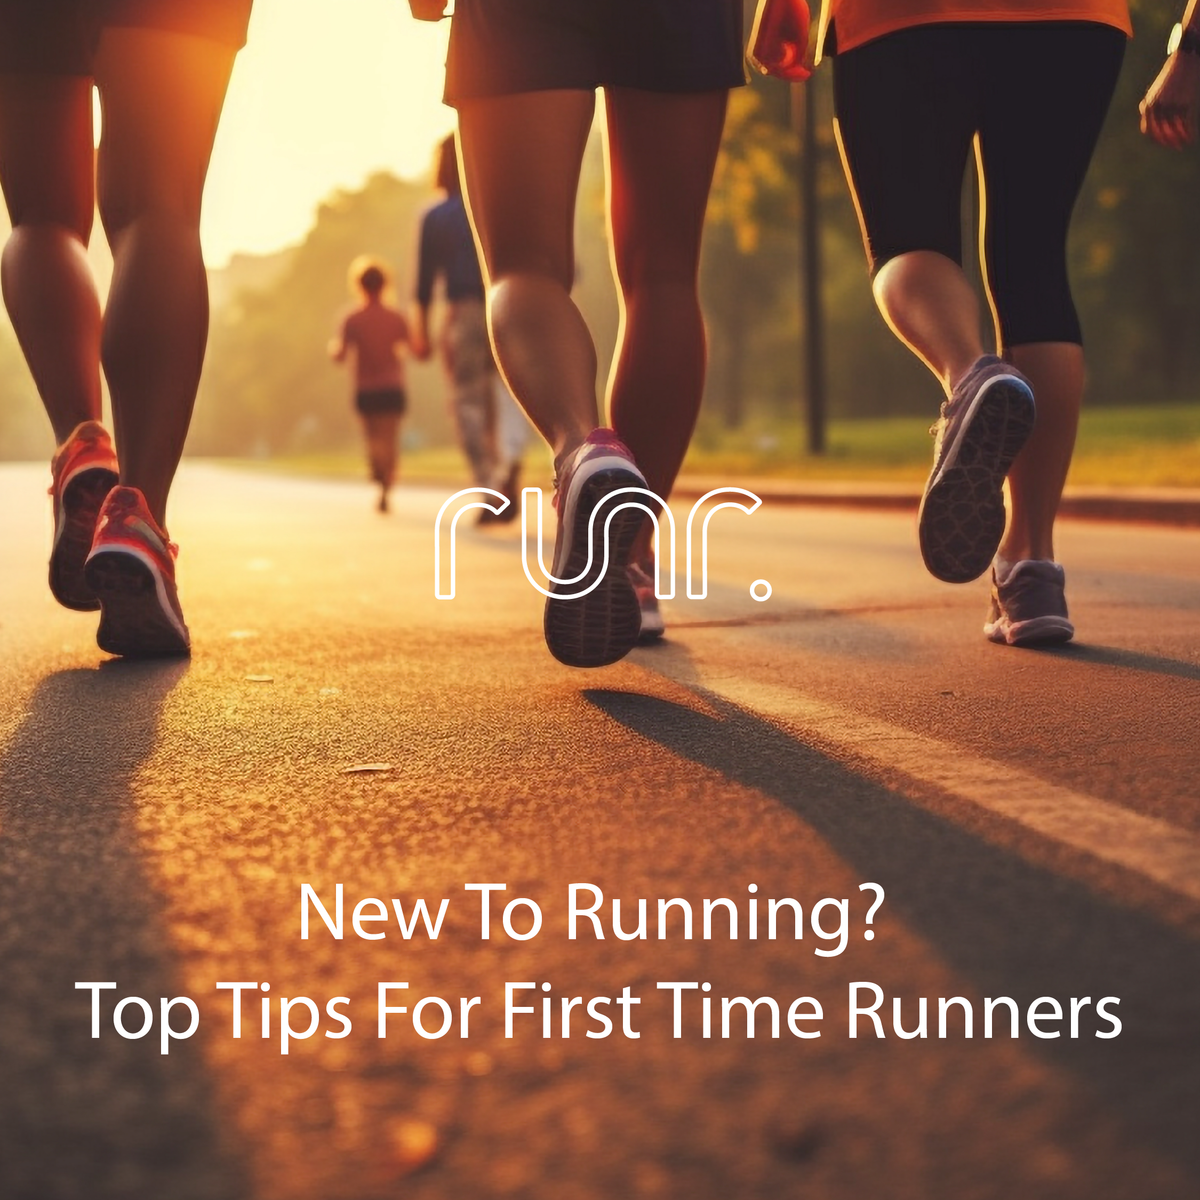 New To Running? Top Tips For First Time Runners